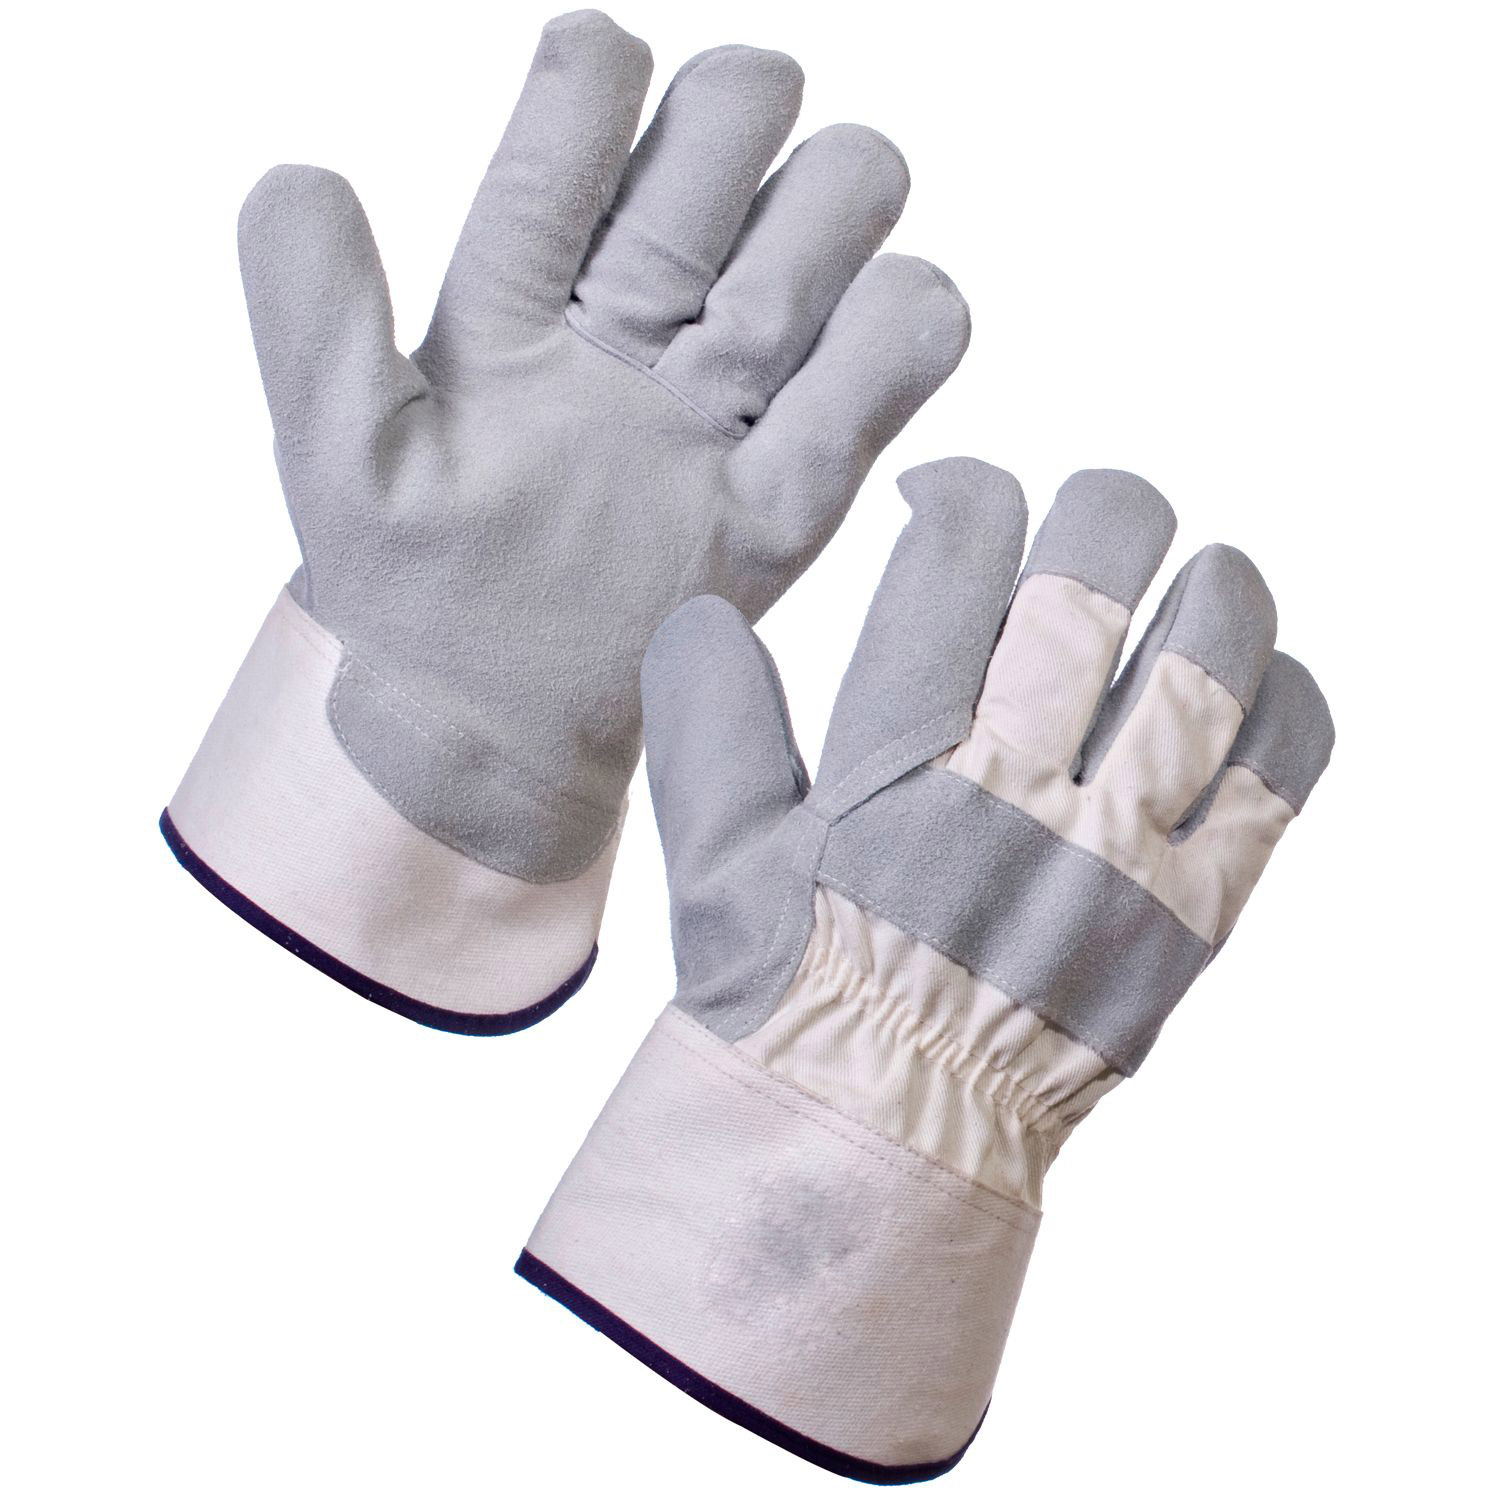 Plus Heavy Duty Leather Rigger Gloves